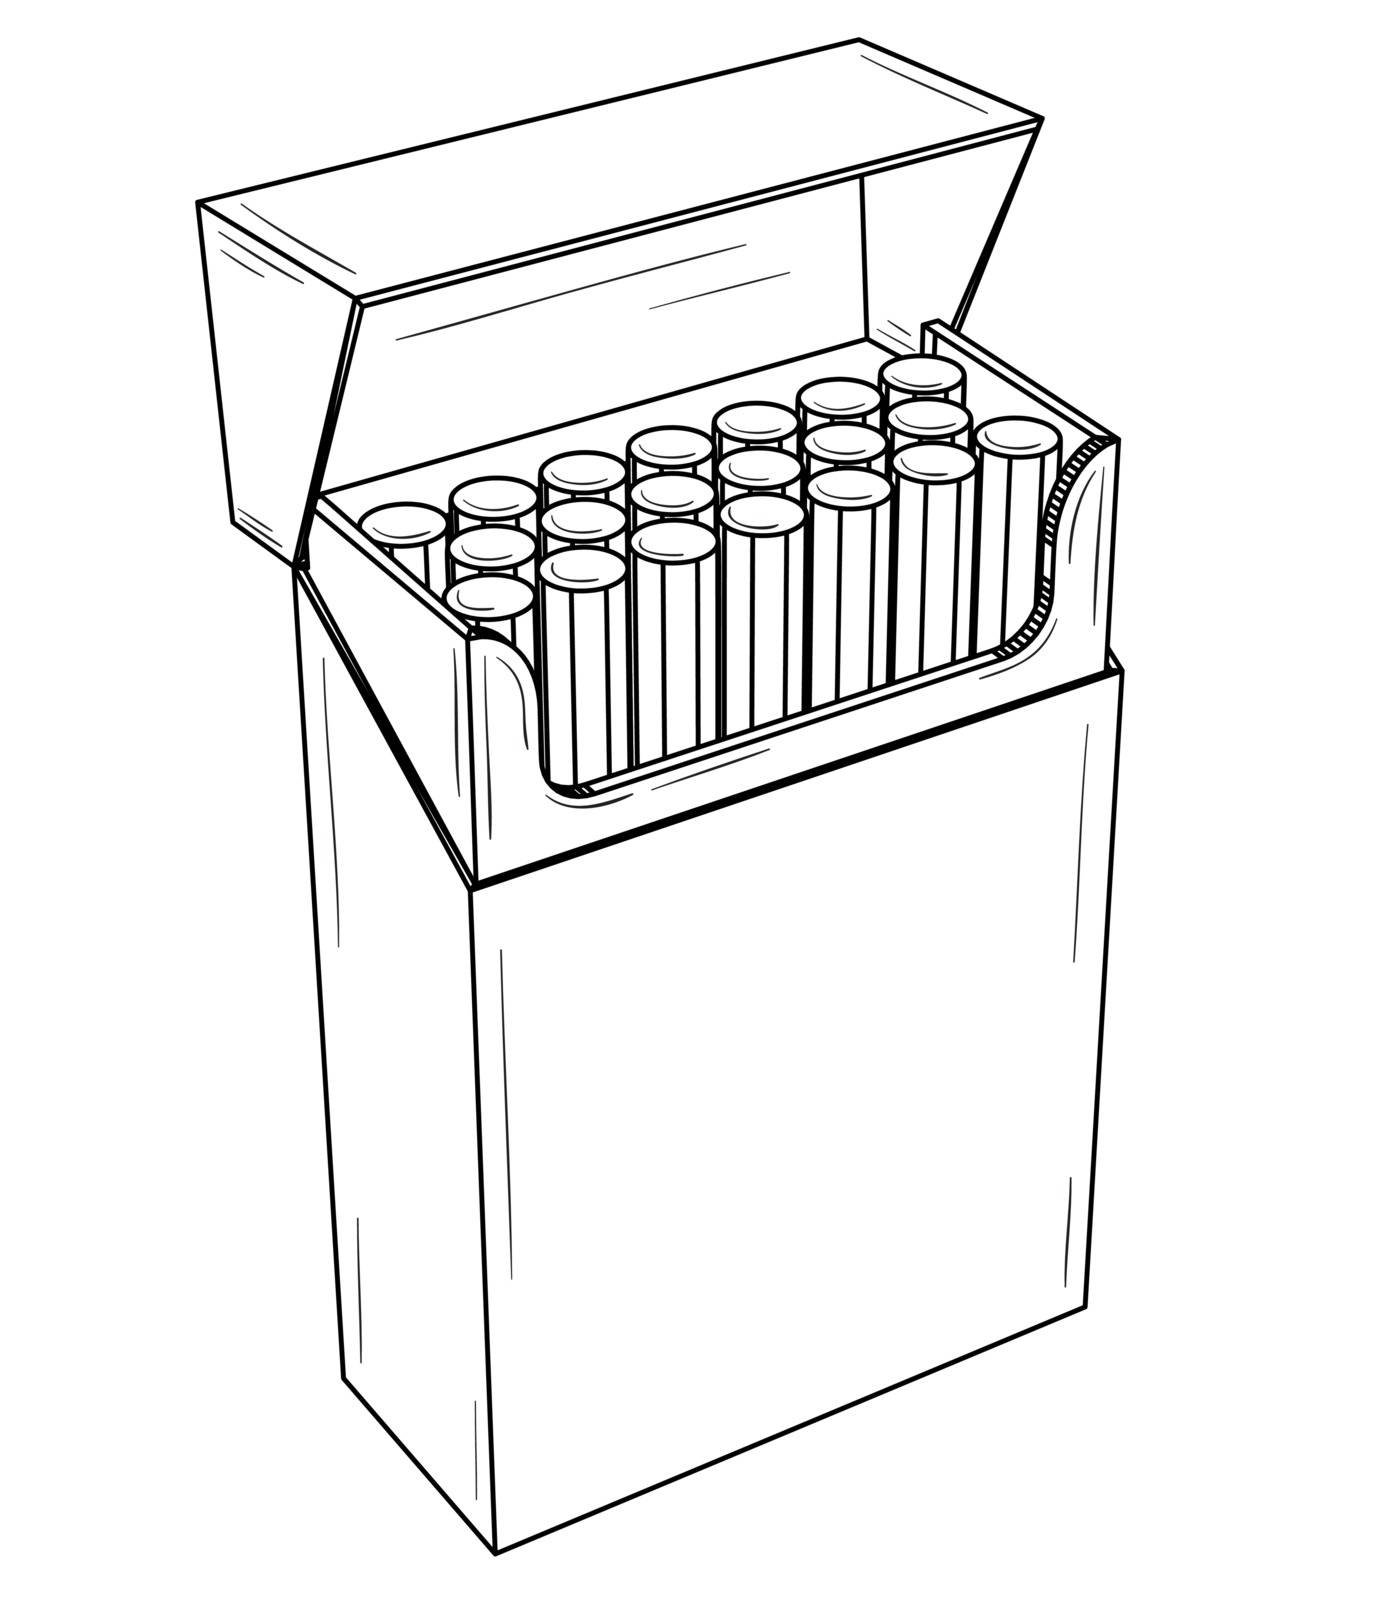 Open pack with cigarettes. Black outline illustration on white background. Sketch.